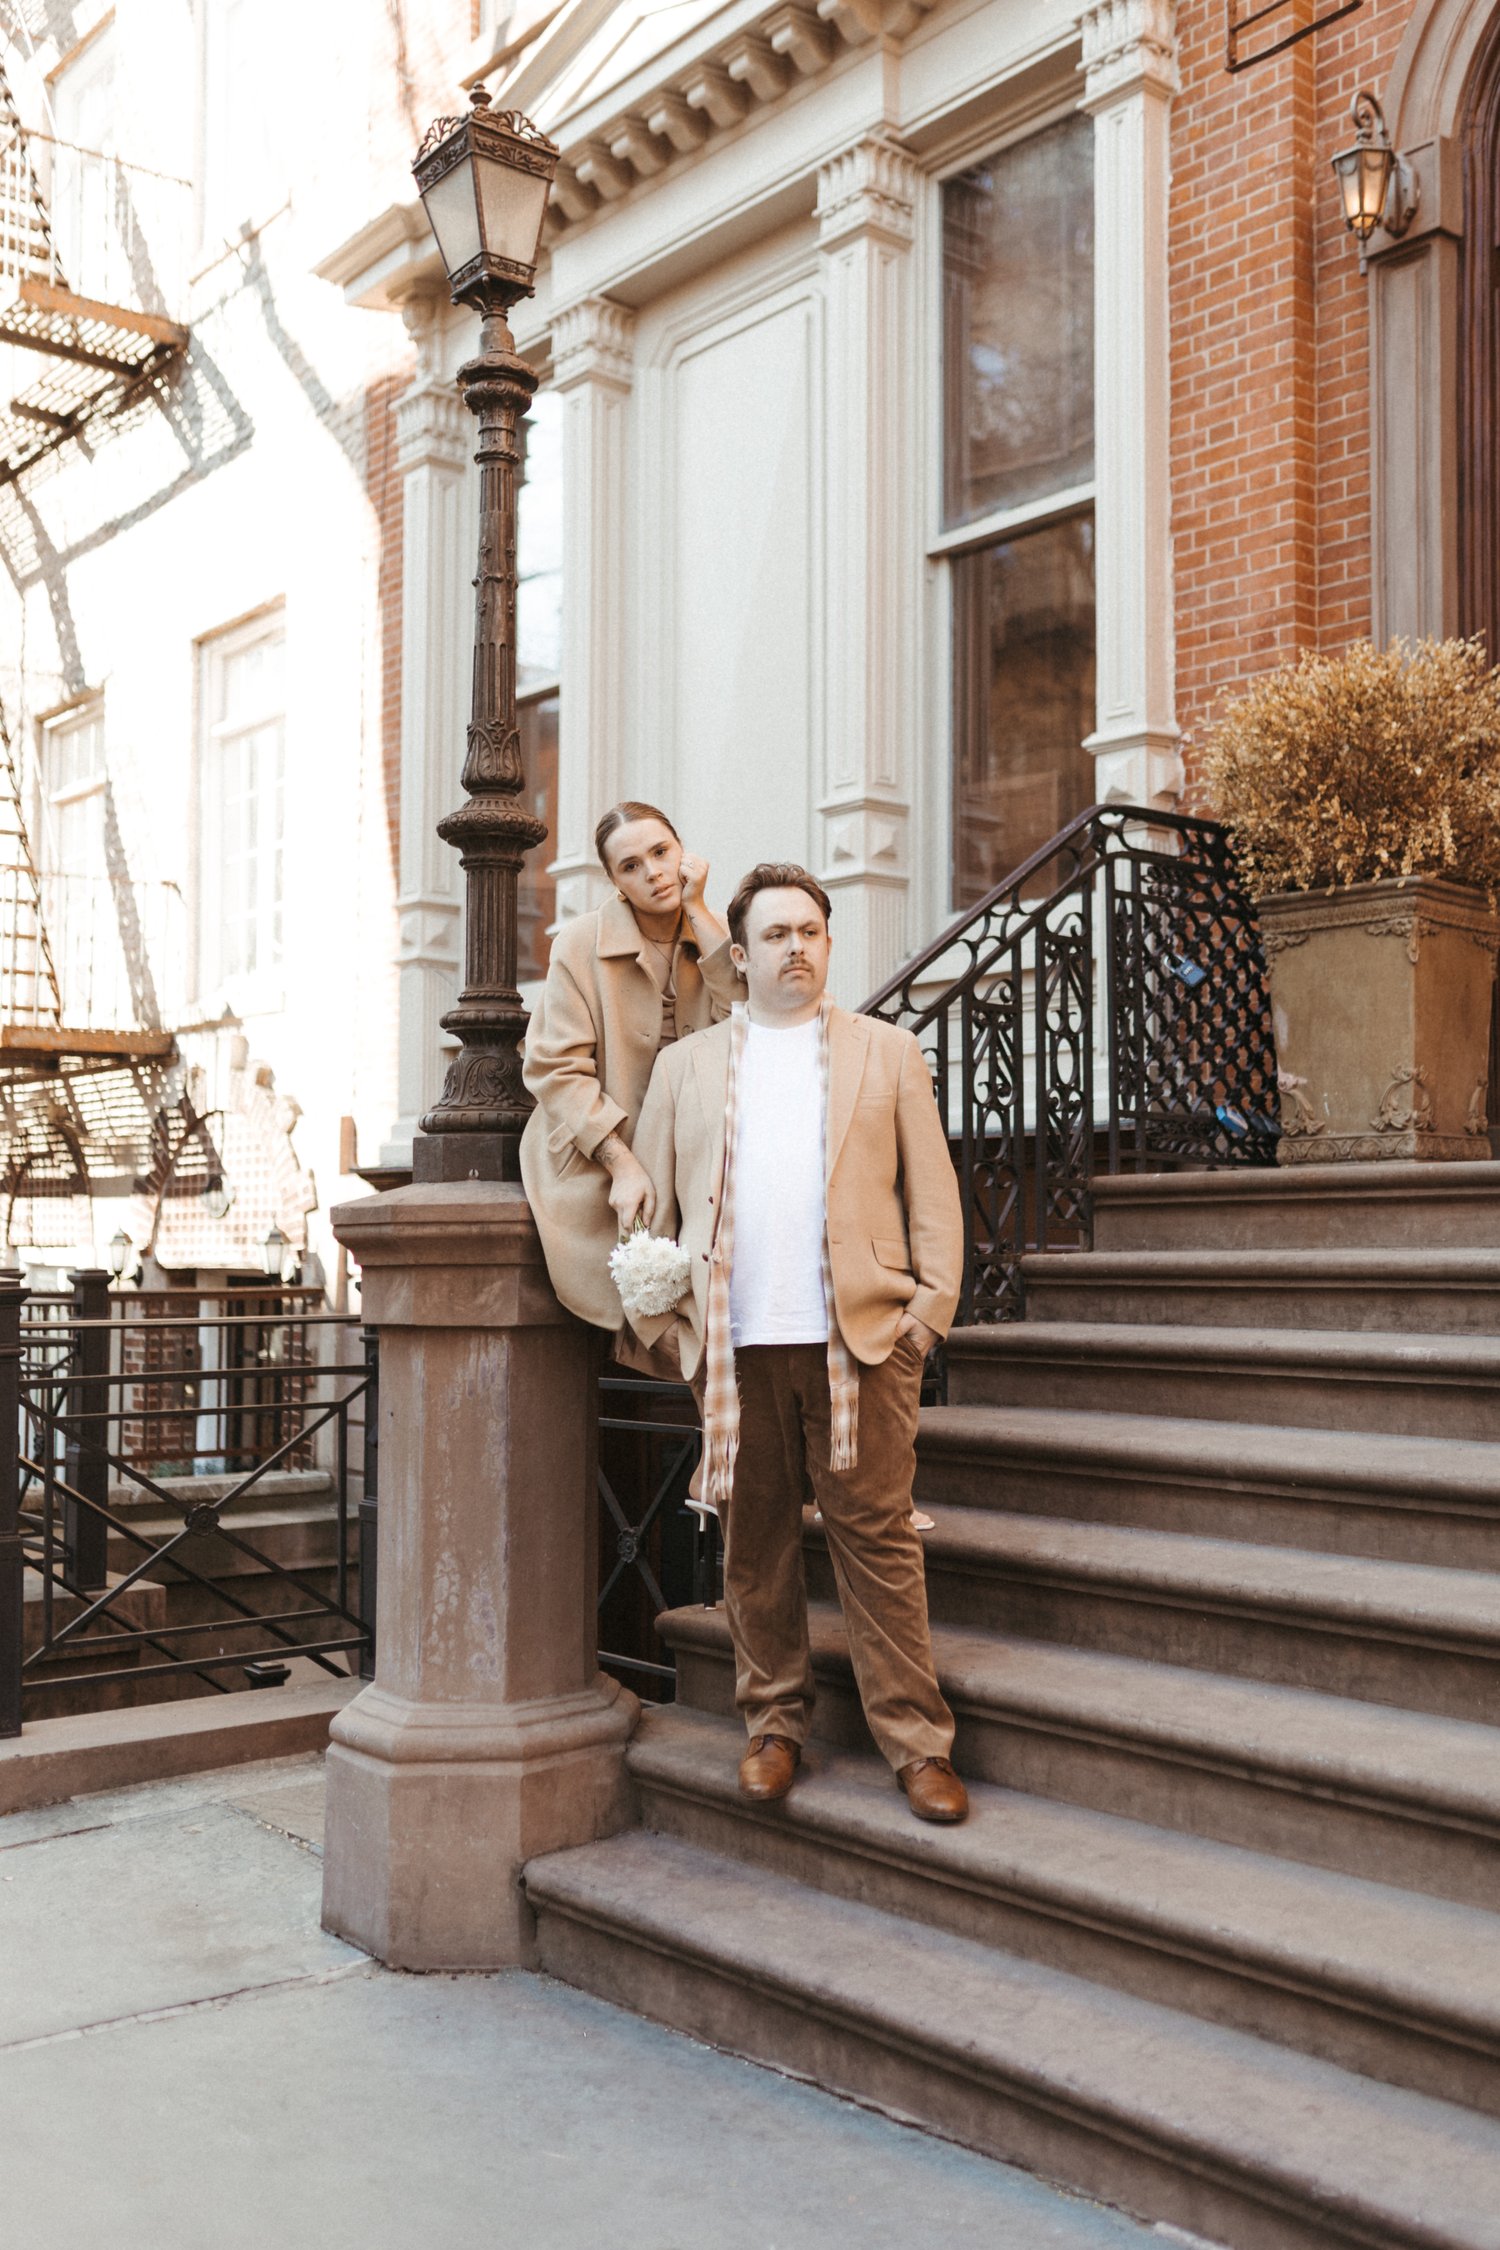 West Village Engagement Session - Unposed & Non traditional NYC Wedding ...